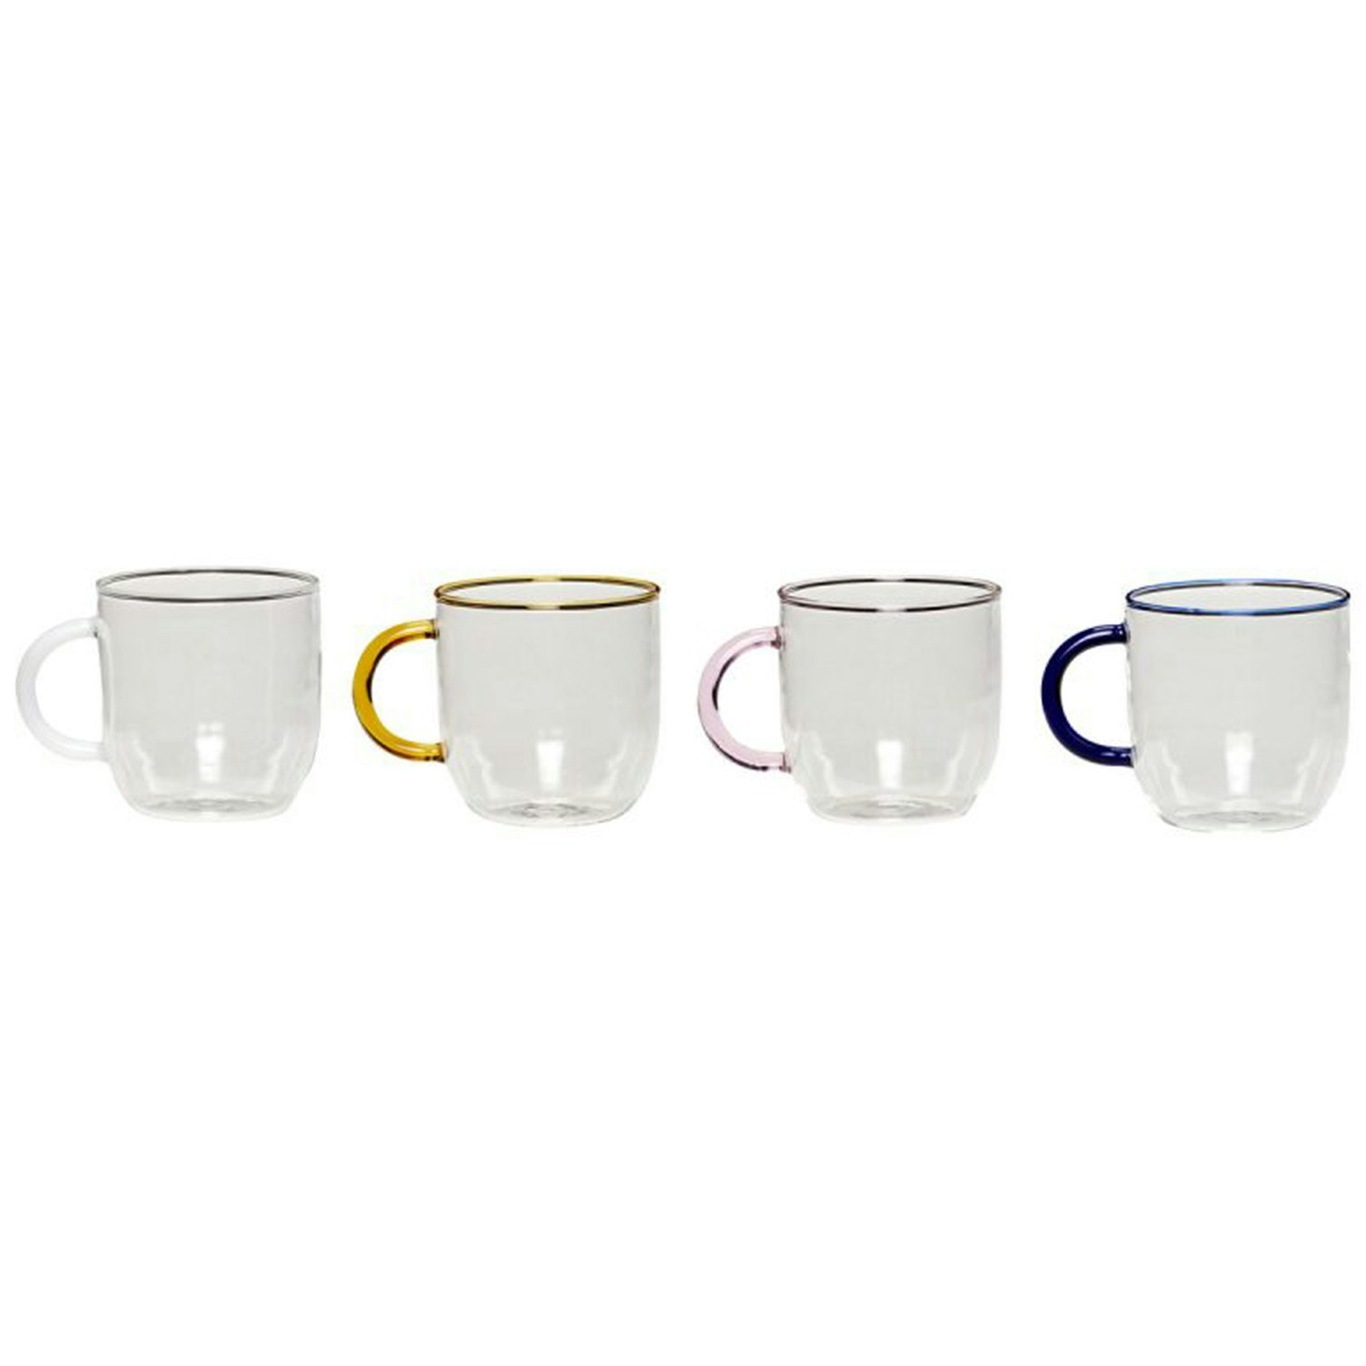 Coffee Studio Espresso Cups and Saucers, 4-pack - Royal Doulton @  RoyalDesign